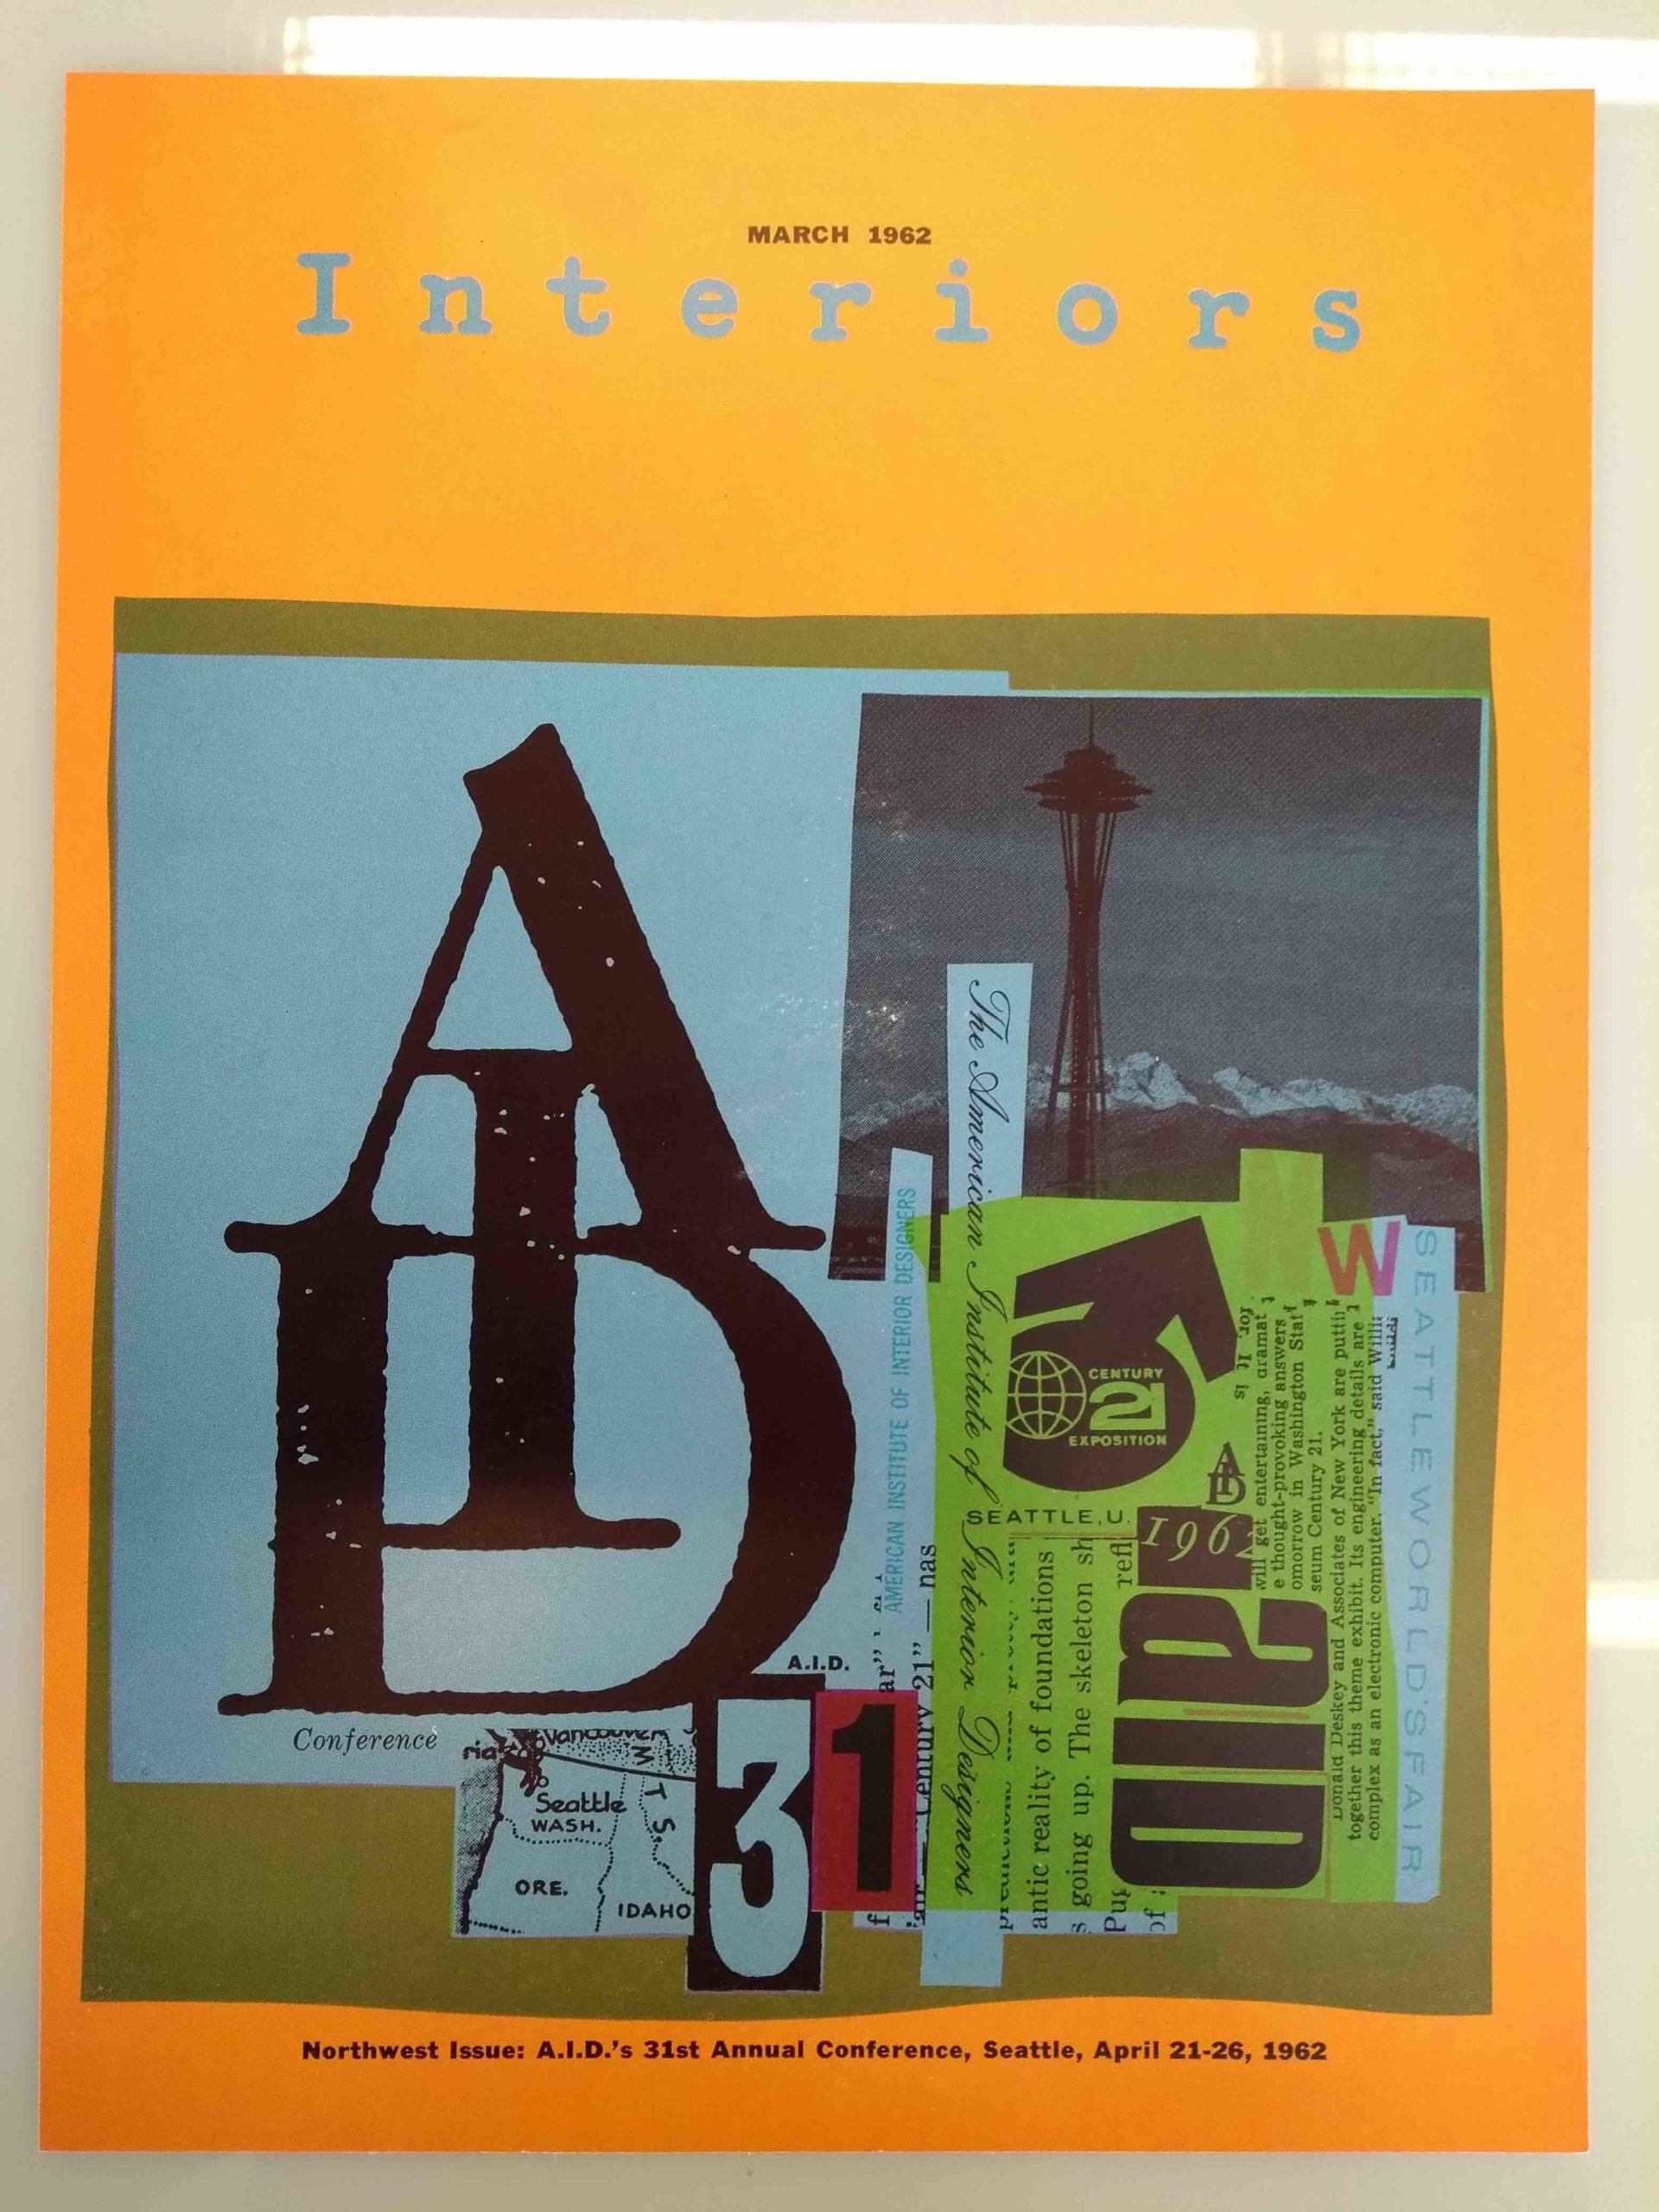 A book cover has a collage of letter prints, a photograph of a tower, newspaper clippings and a map of Seattle. On the top it writes “march 1962 Interiors” 